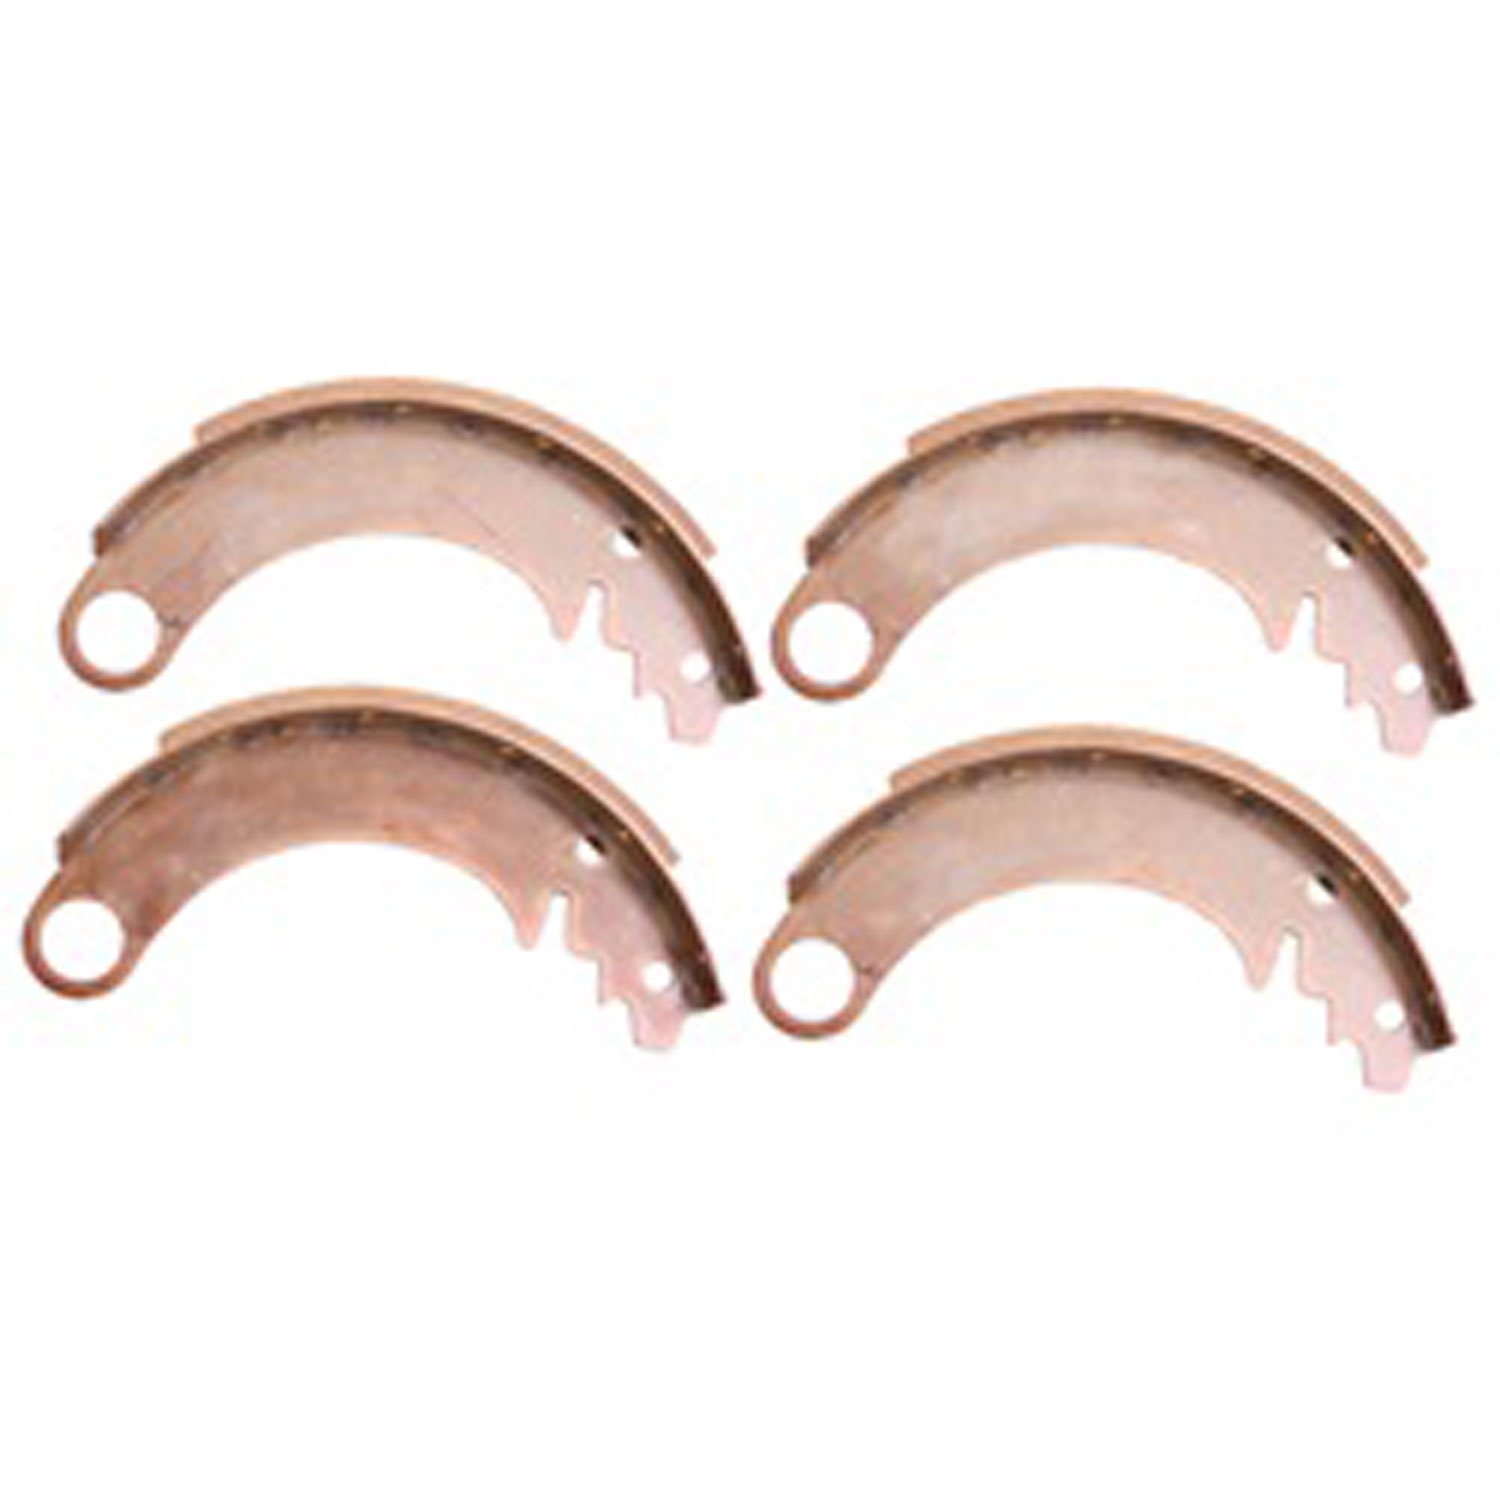 This set of 9 inch brake shoes from Omix-ADA fits 41-45 Willys MB 46-49 Willys CJ2A and 49-53 Willys